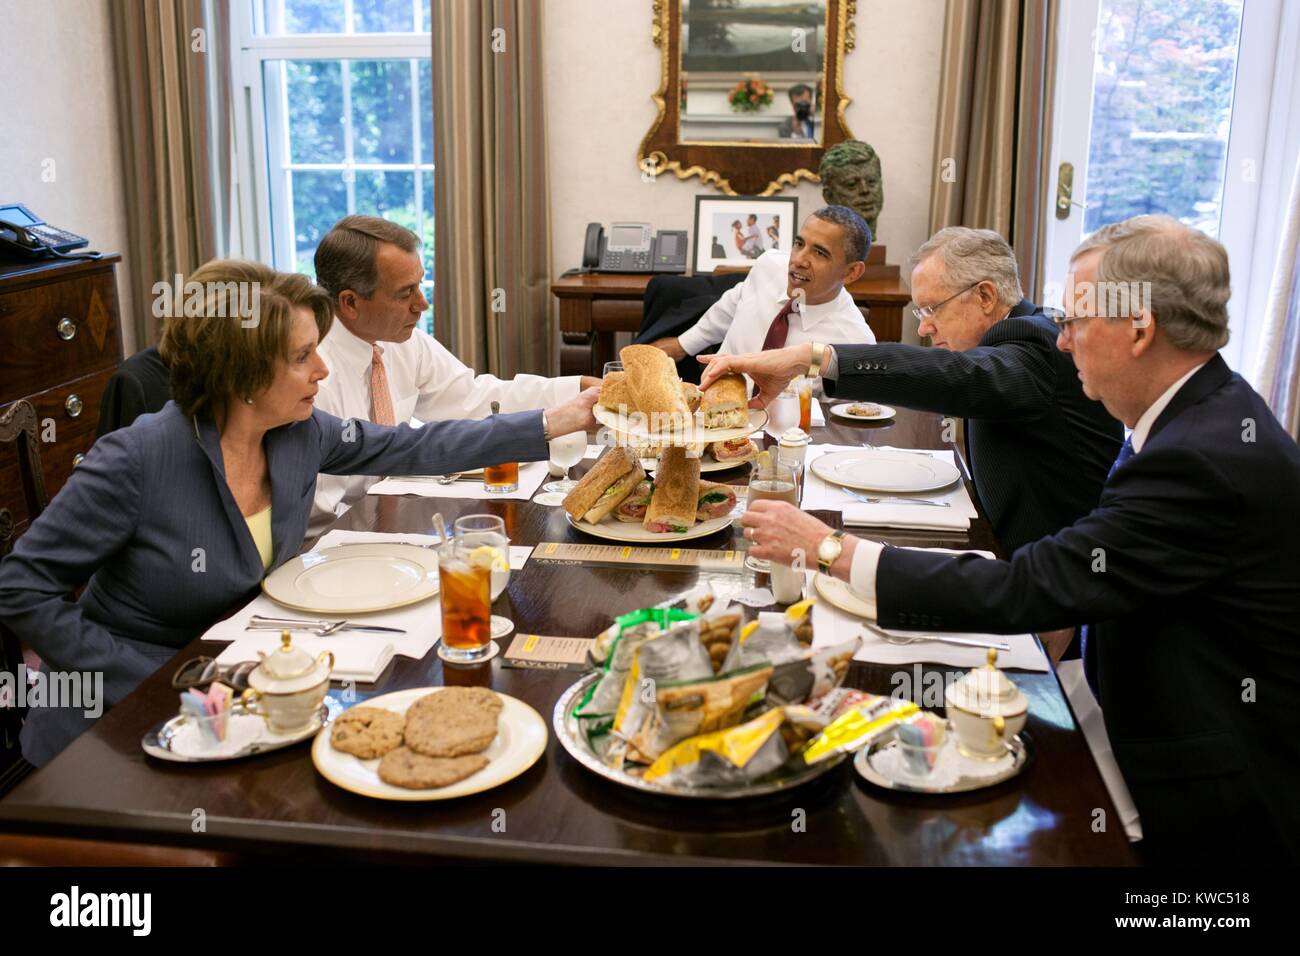 President Barack Obama lunching with Congressional Leadership, May 16, 2012. L-R: Nancy Pelosi, John Boehner, the President, Harry Reid, and Mitch McConnell. The President served hoagies in the White House Oval Office Private Dining Room, May 16, 2012 (BSLOC 2015 13 221) Stock Photo